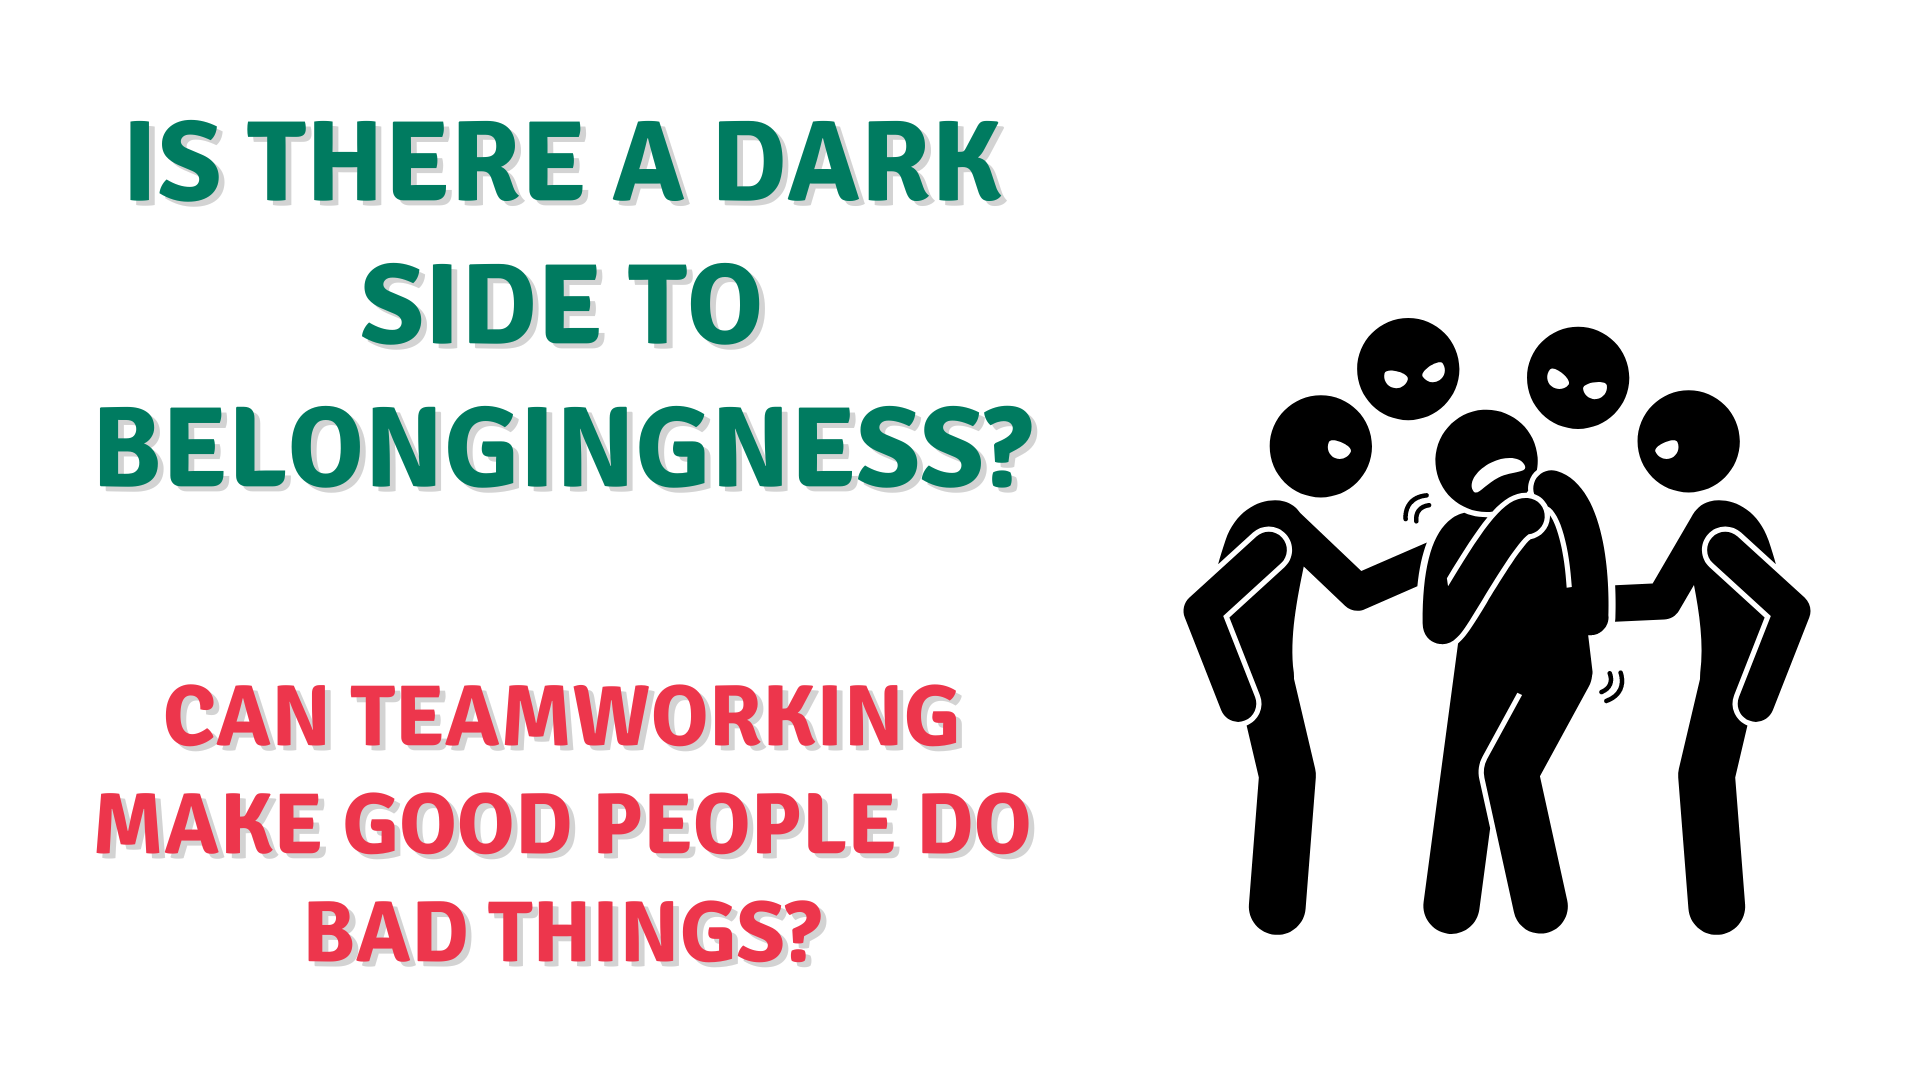 Is there a dark side to belongingness? Can teamworking make good people do bad things?